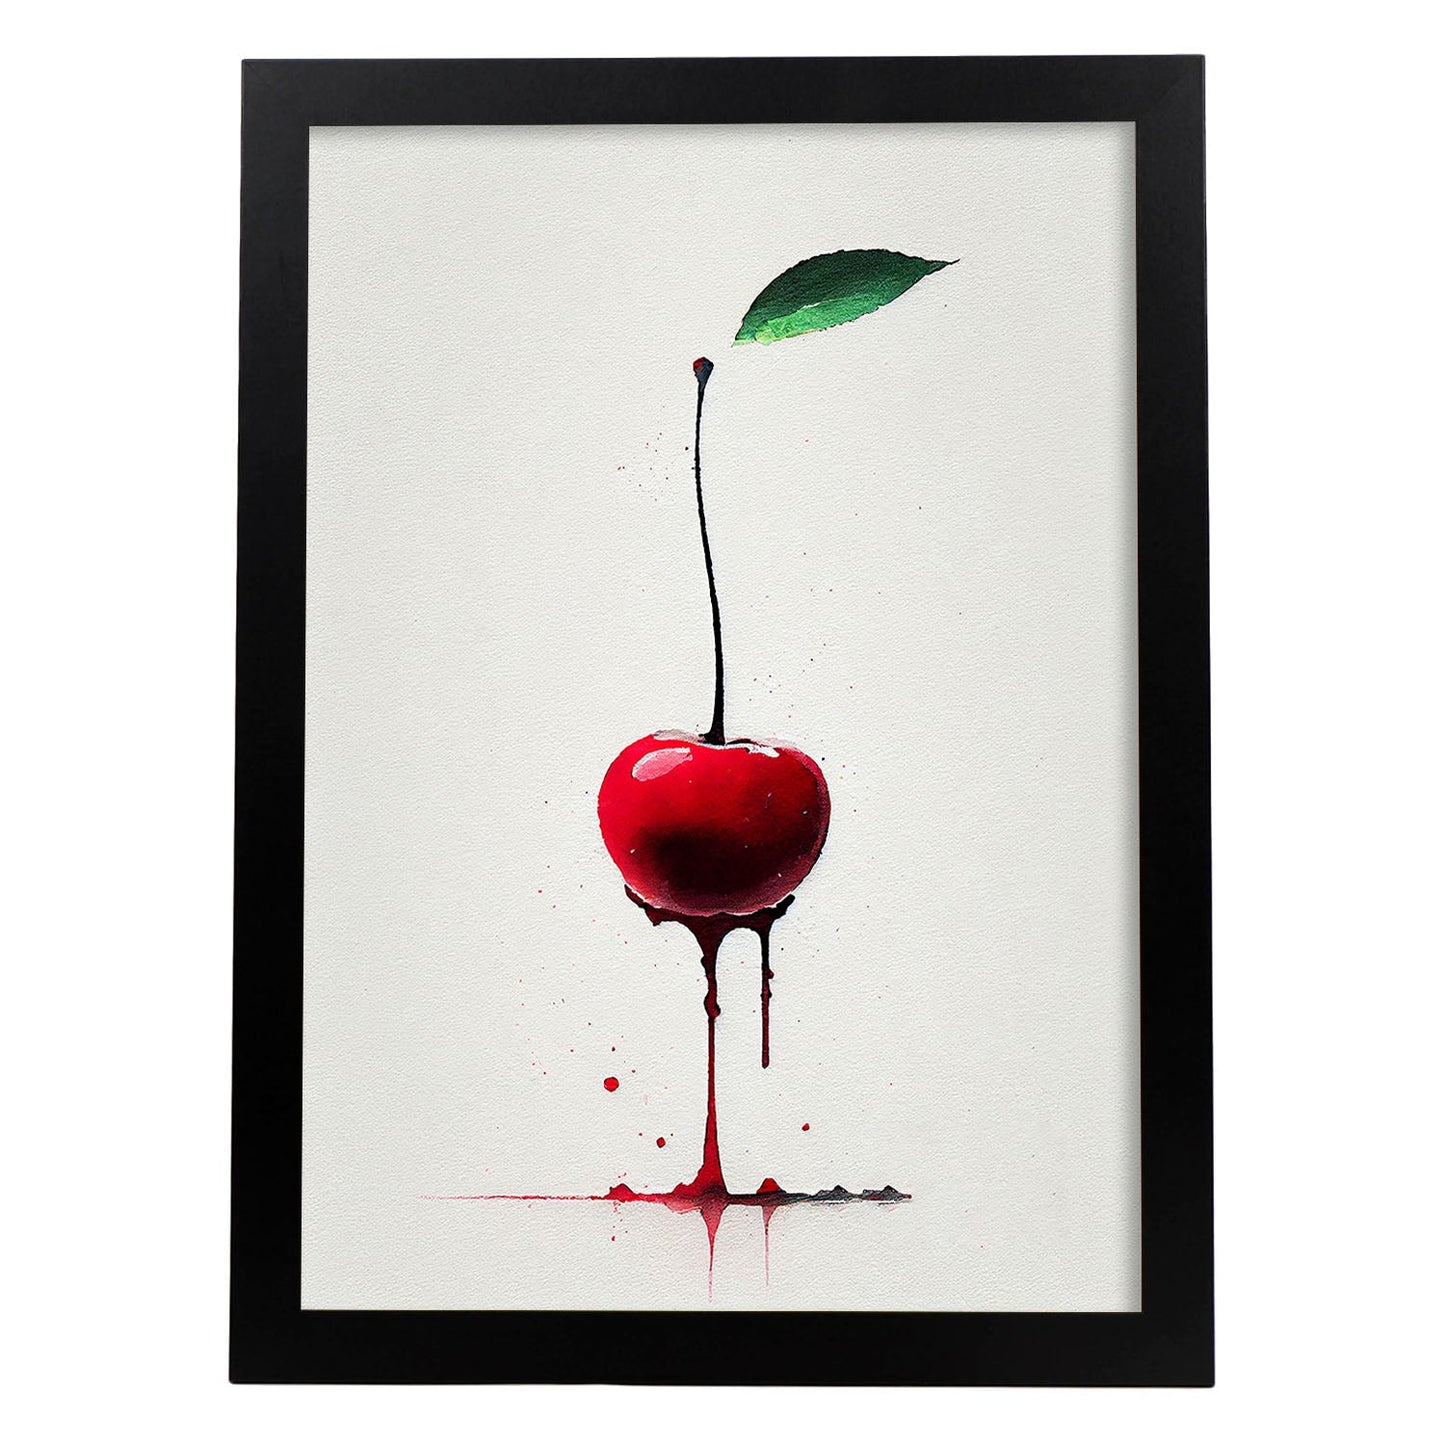 Nacnic minimalist Cherry_2. Aesthetic Wall Art Prints for Bedroom or Living Room Design.